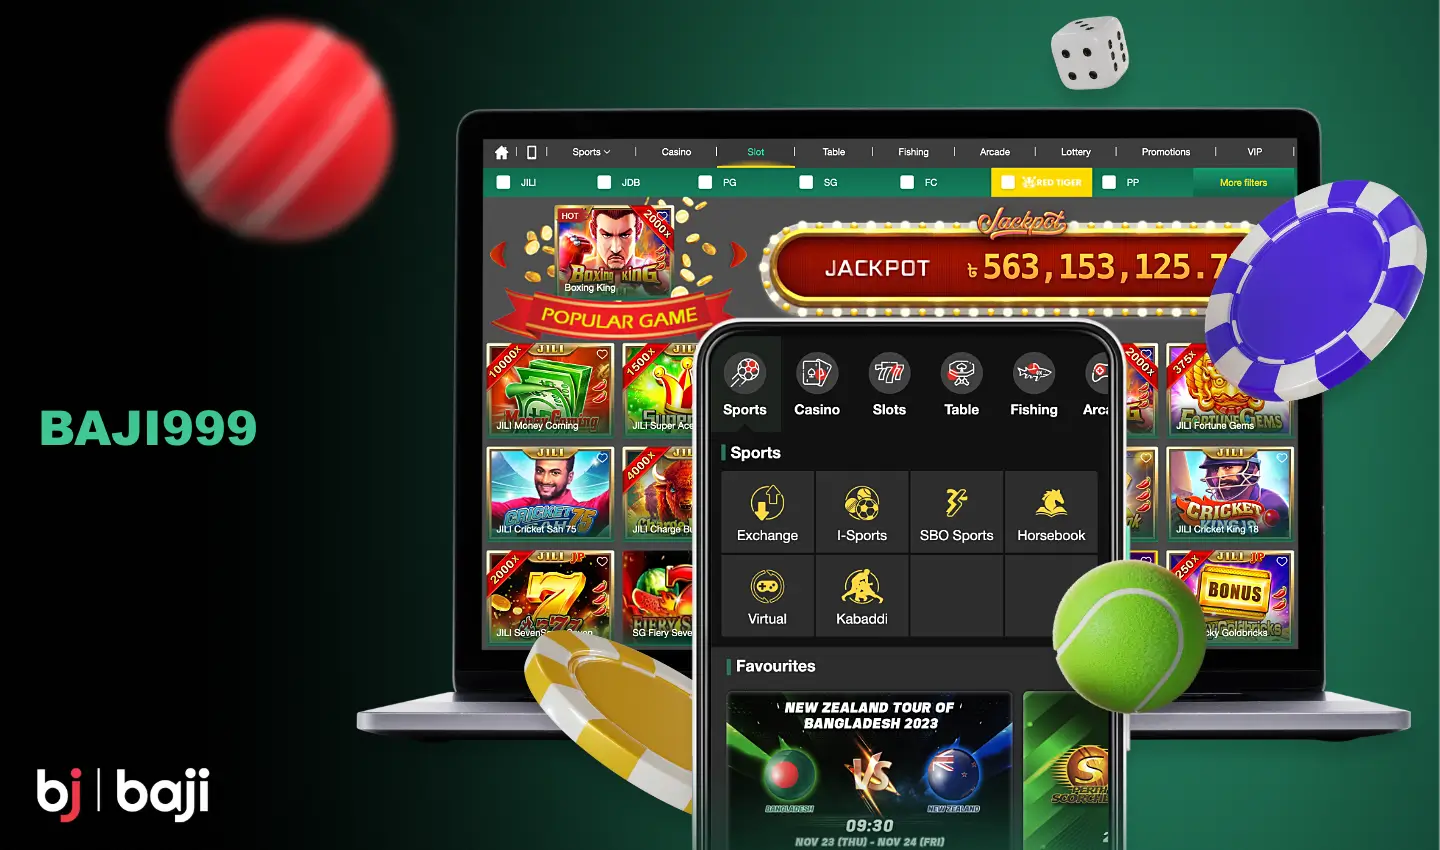 Baji999 is a popular platform in Bangladesh where users can access hundreds of gambling games including slots, live dealer games, and sports betting